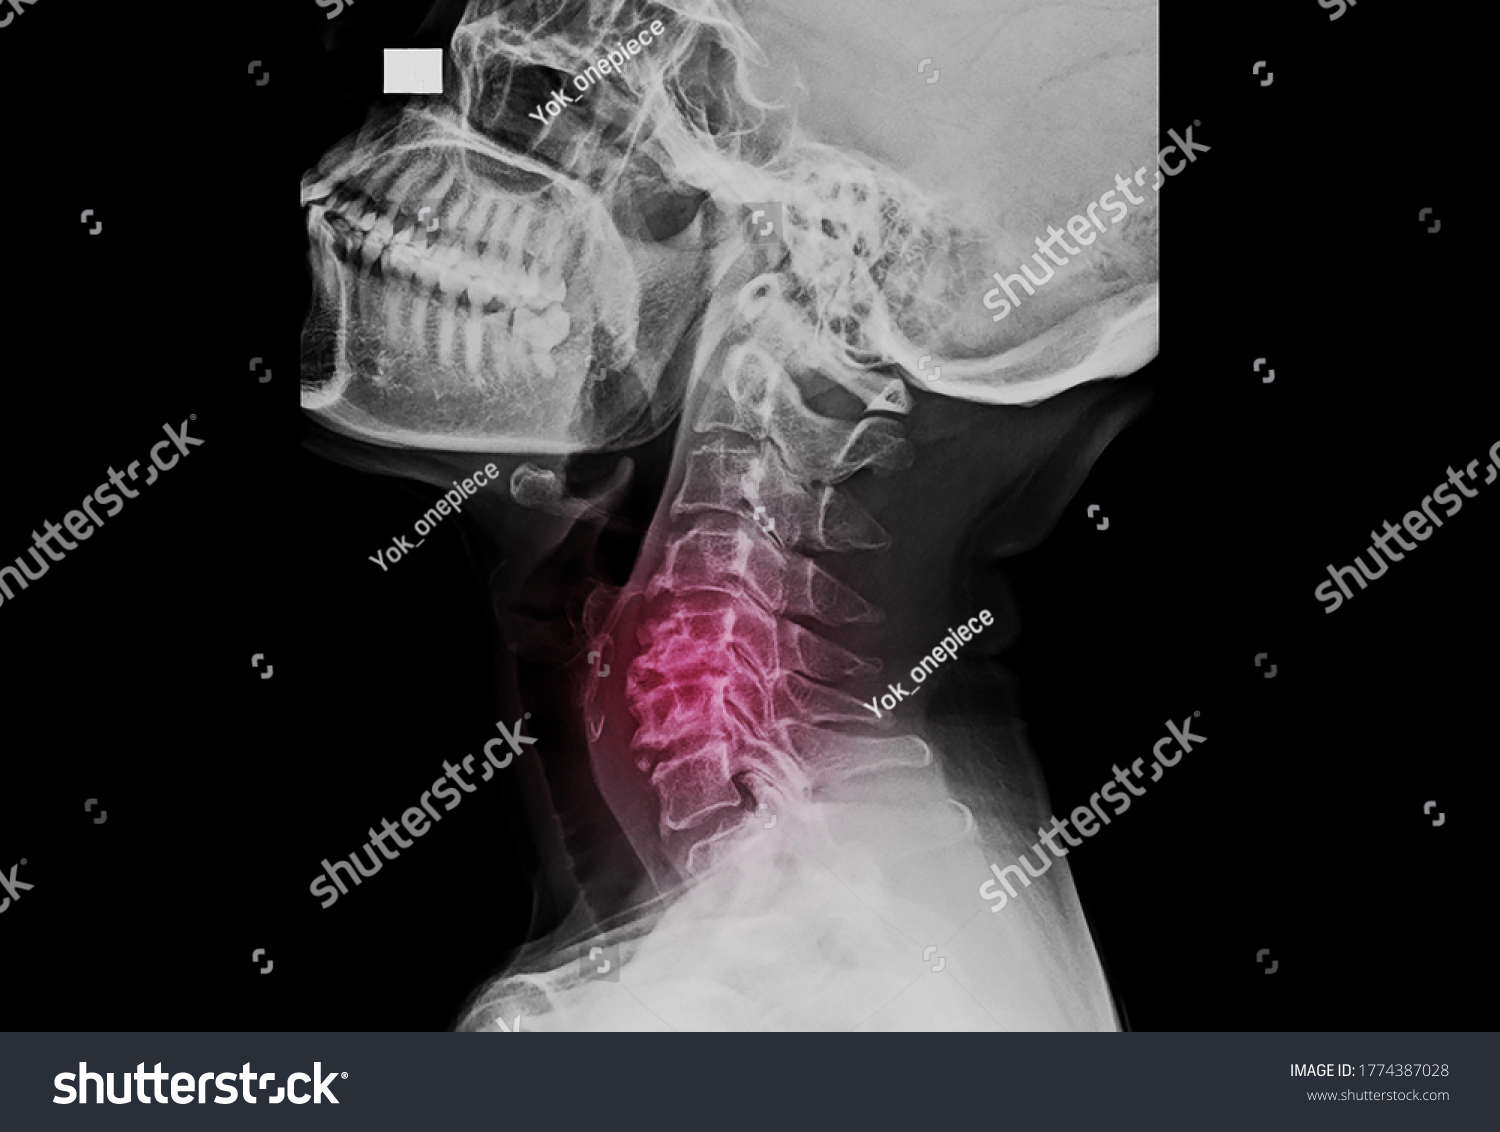 A lateral projection of cervical spine x-ray showing multiple degenerative spondylosis causing neck pain and myelopathy. The patient needs surgical decompression, reconstruction and spinal fusion. #1774387028